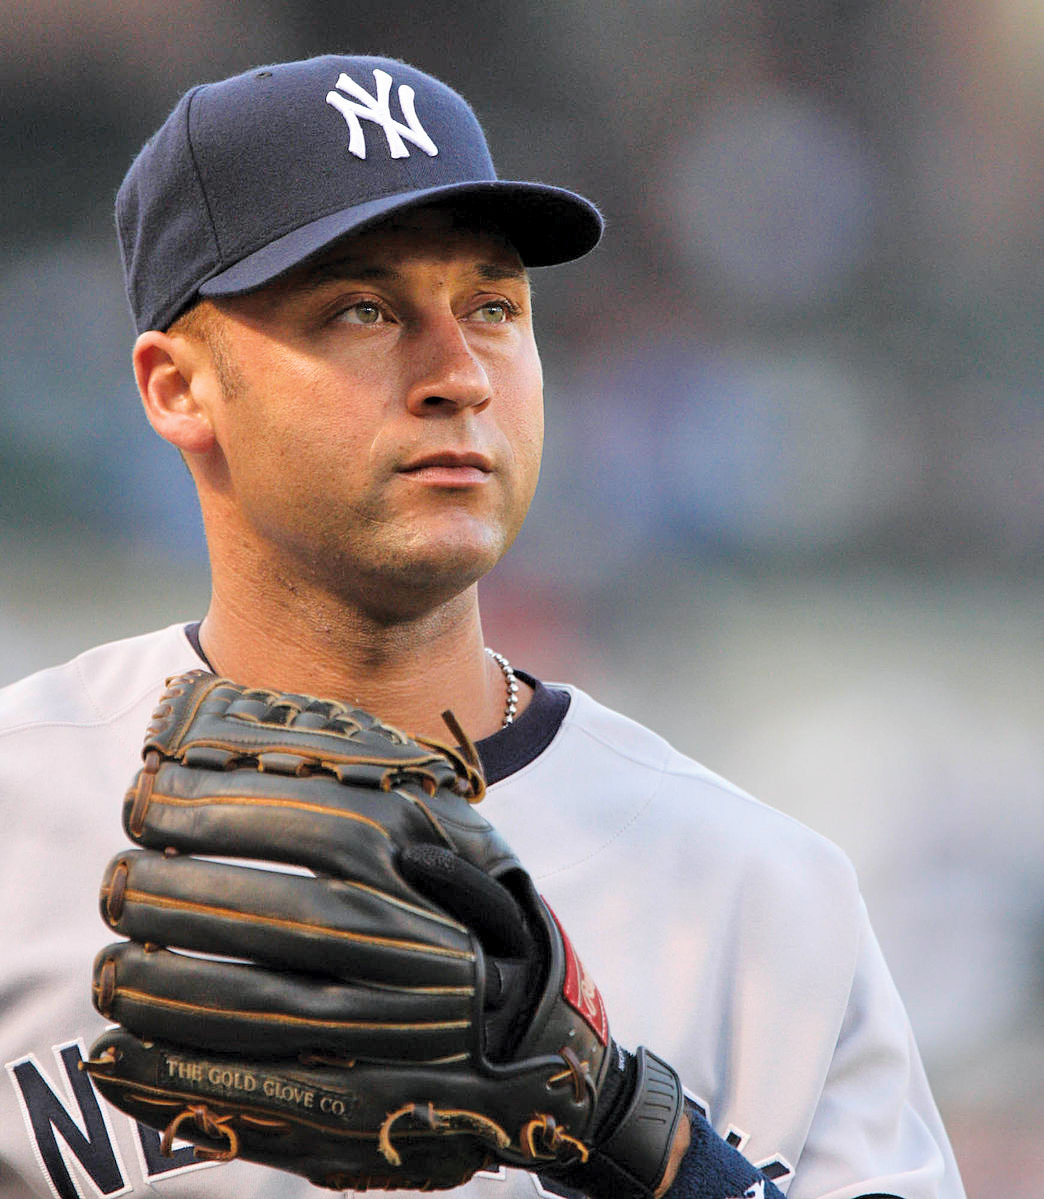 Derek Jeter, Larry Walker cement legacies with Hall of Fame selections ...